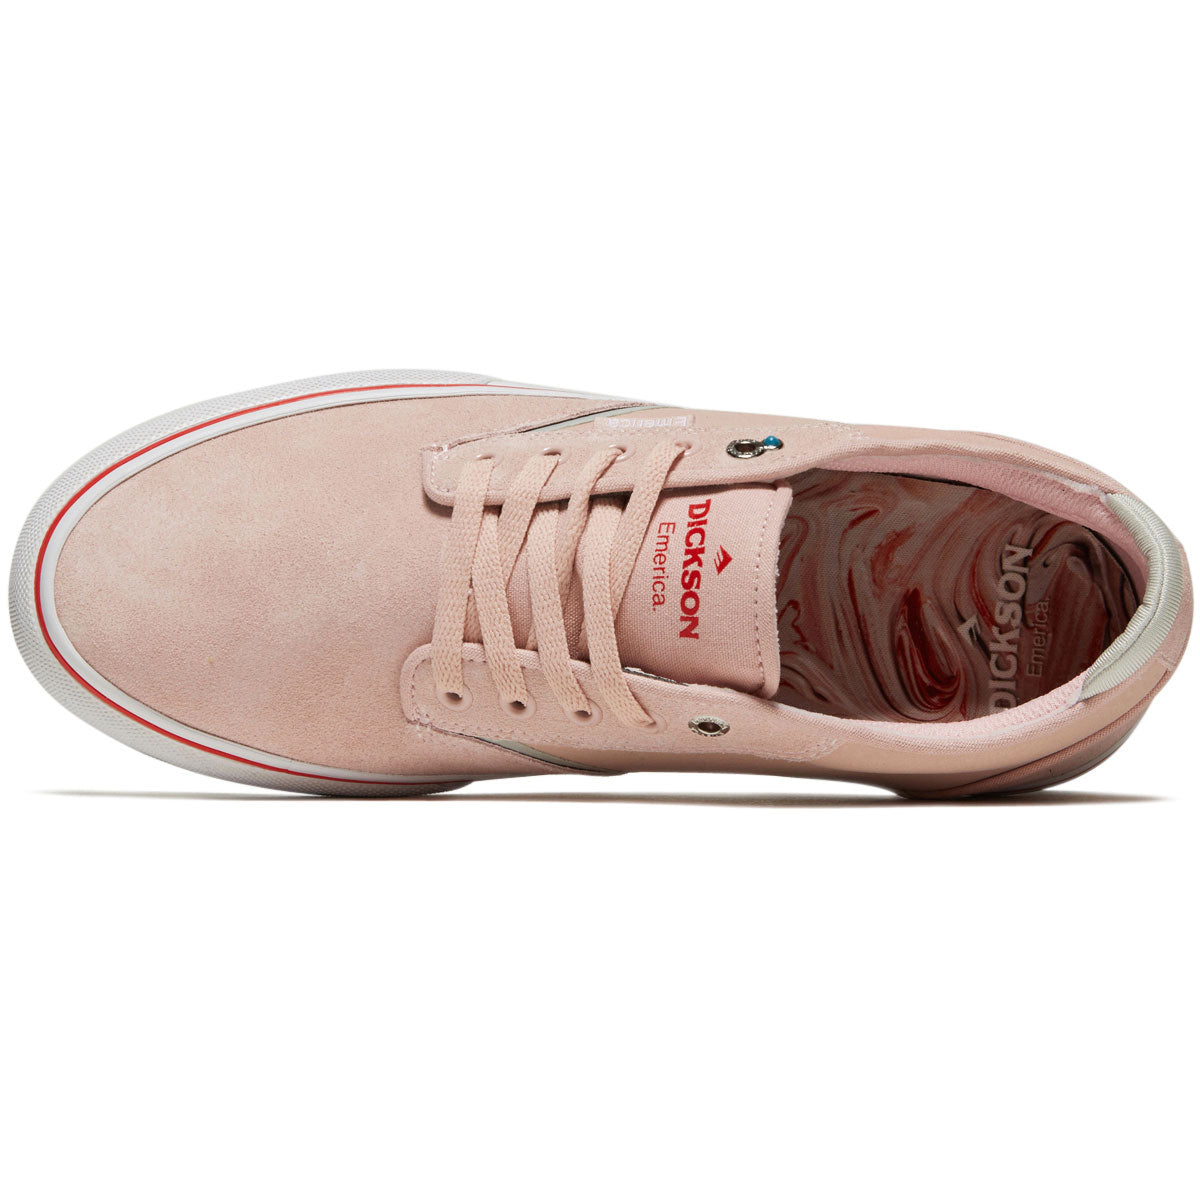 Emerica Dickson Shoes - Pink image 3